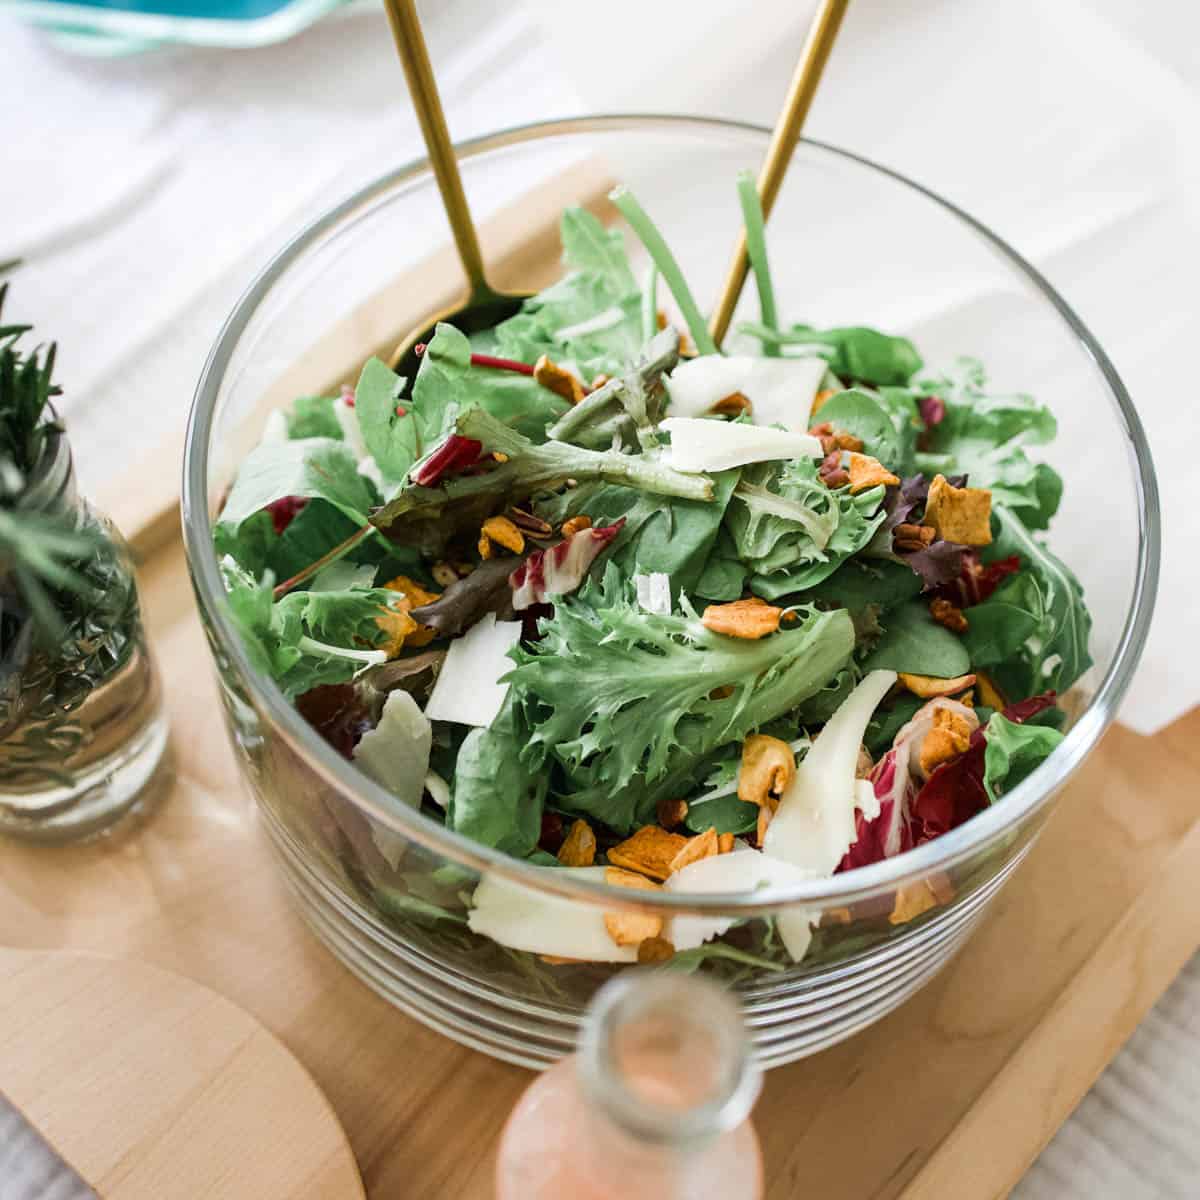 A green salad in a bowl with cheese and serving spoons.